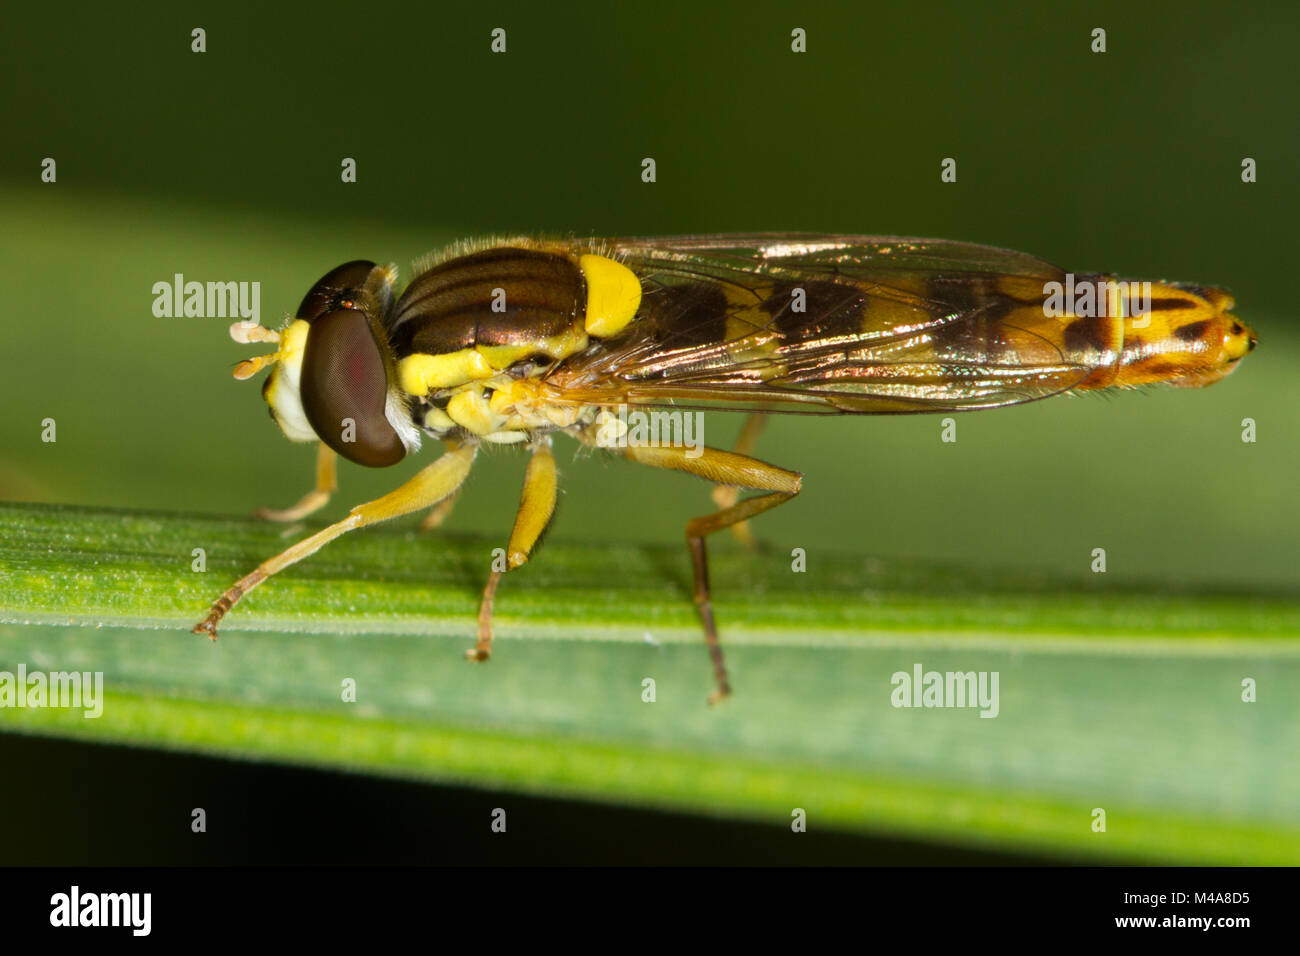 Sphaerophoria sp., a wasp-mimic hoverfly, resting on a blade of grass Stock Photo